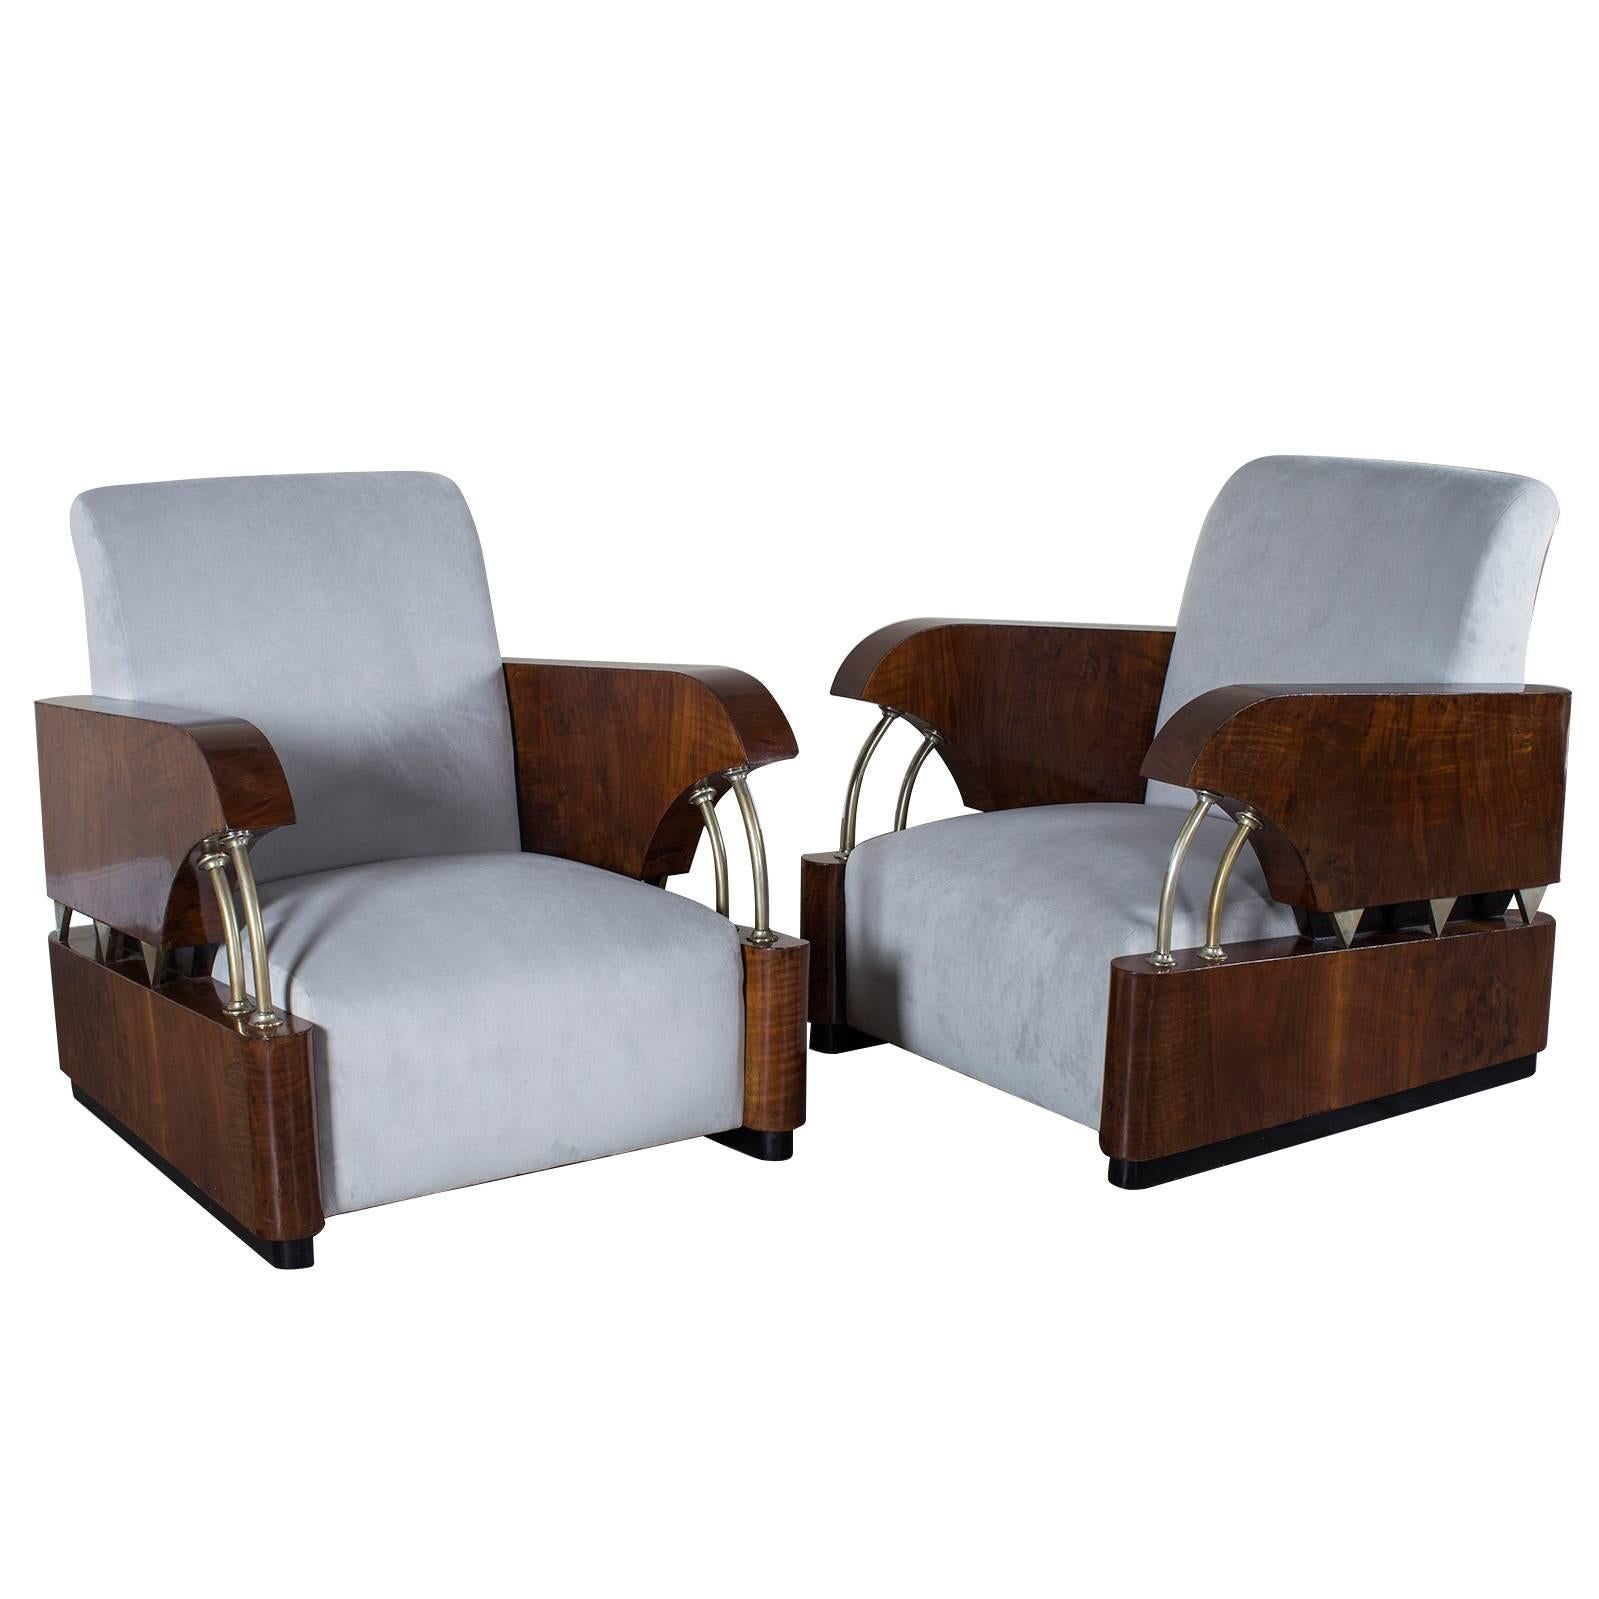 Pair of Vintage French Art Deco Period "Normandie" Armchairs, circa 1930